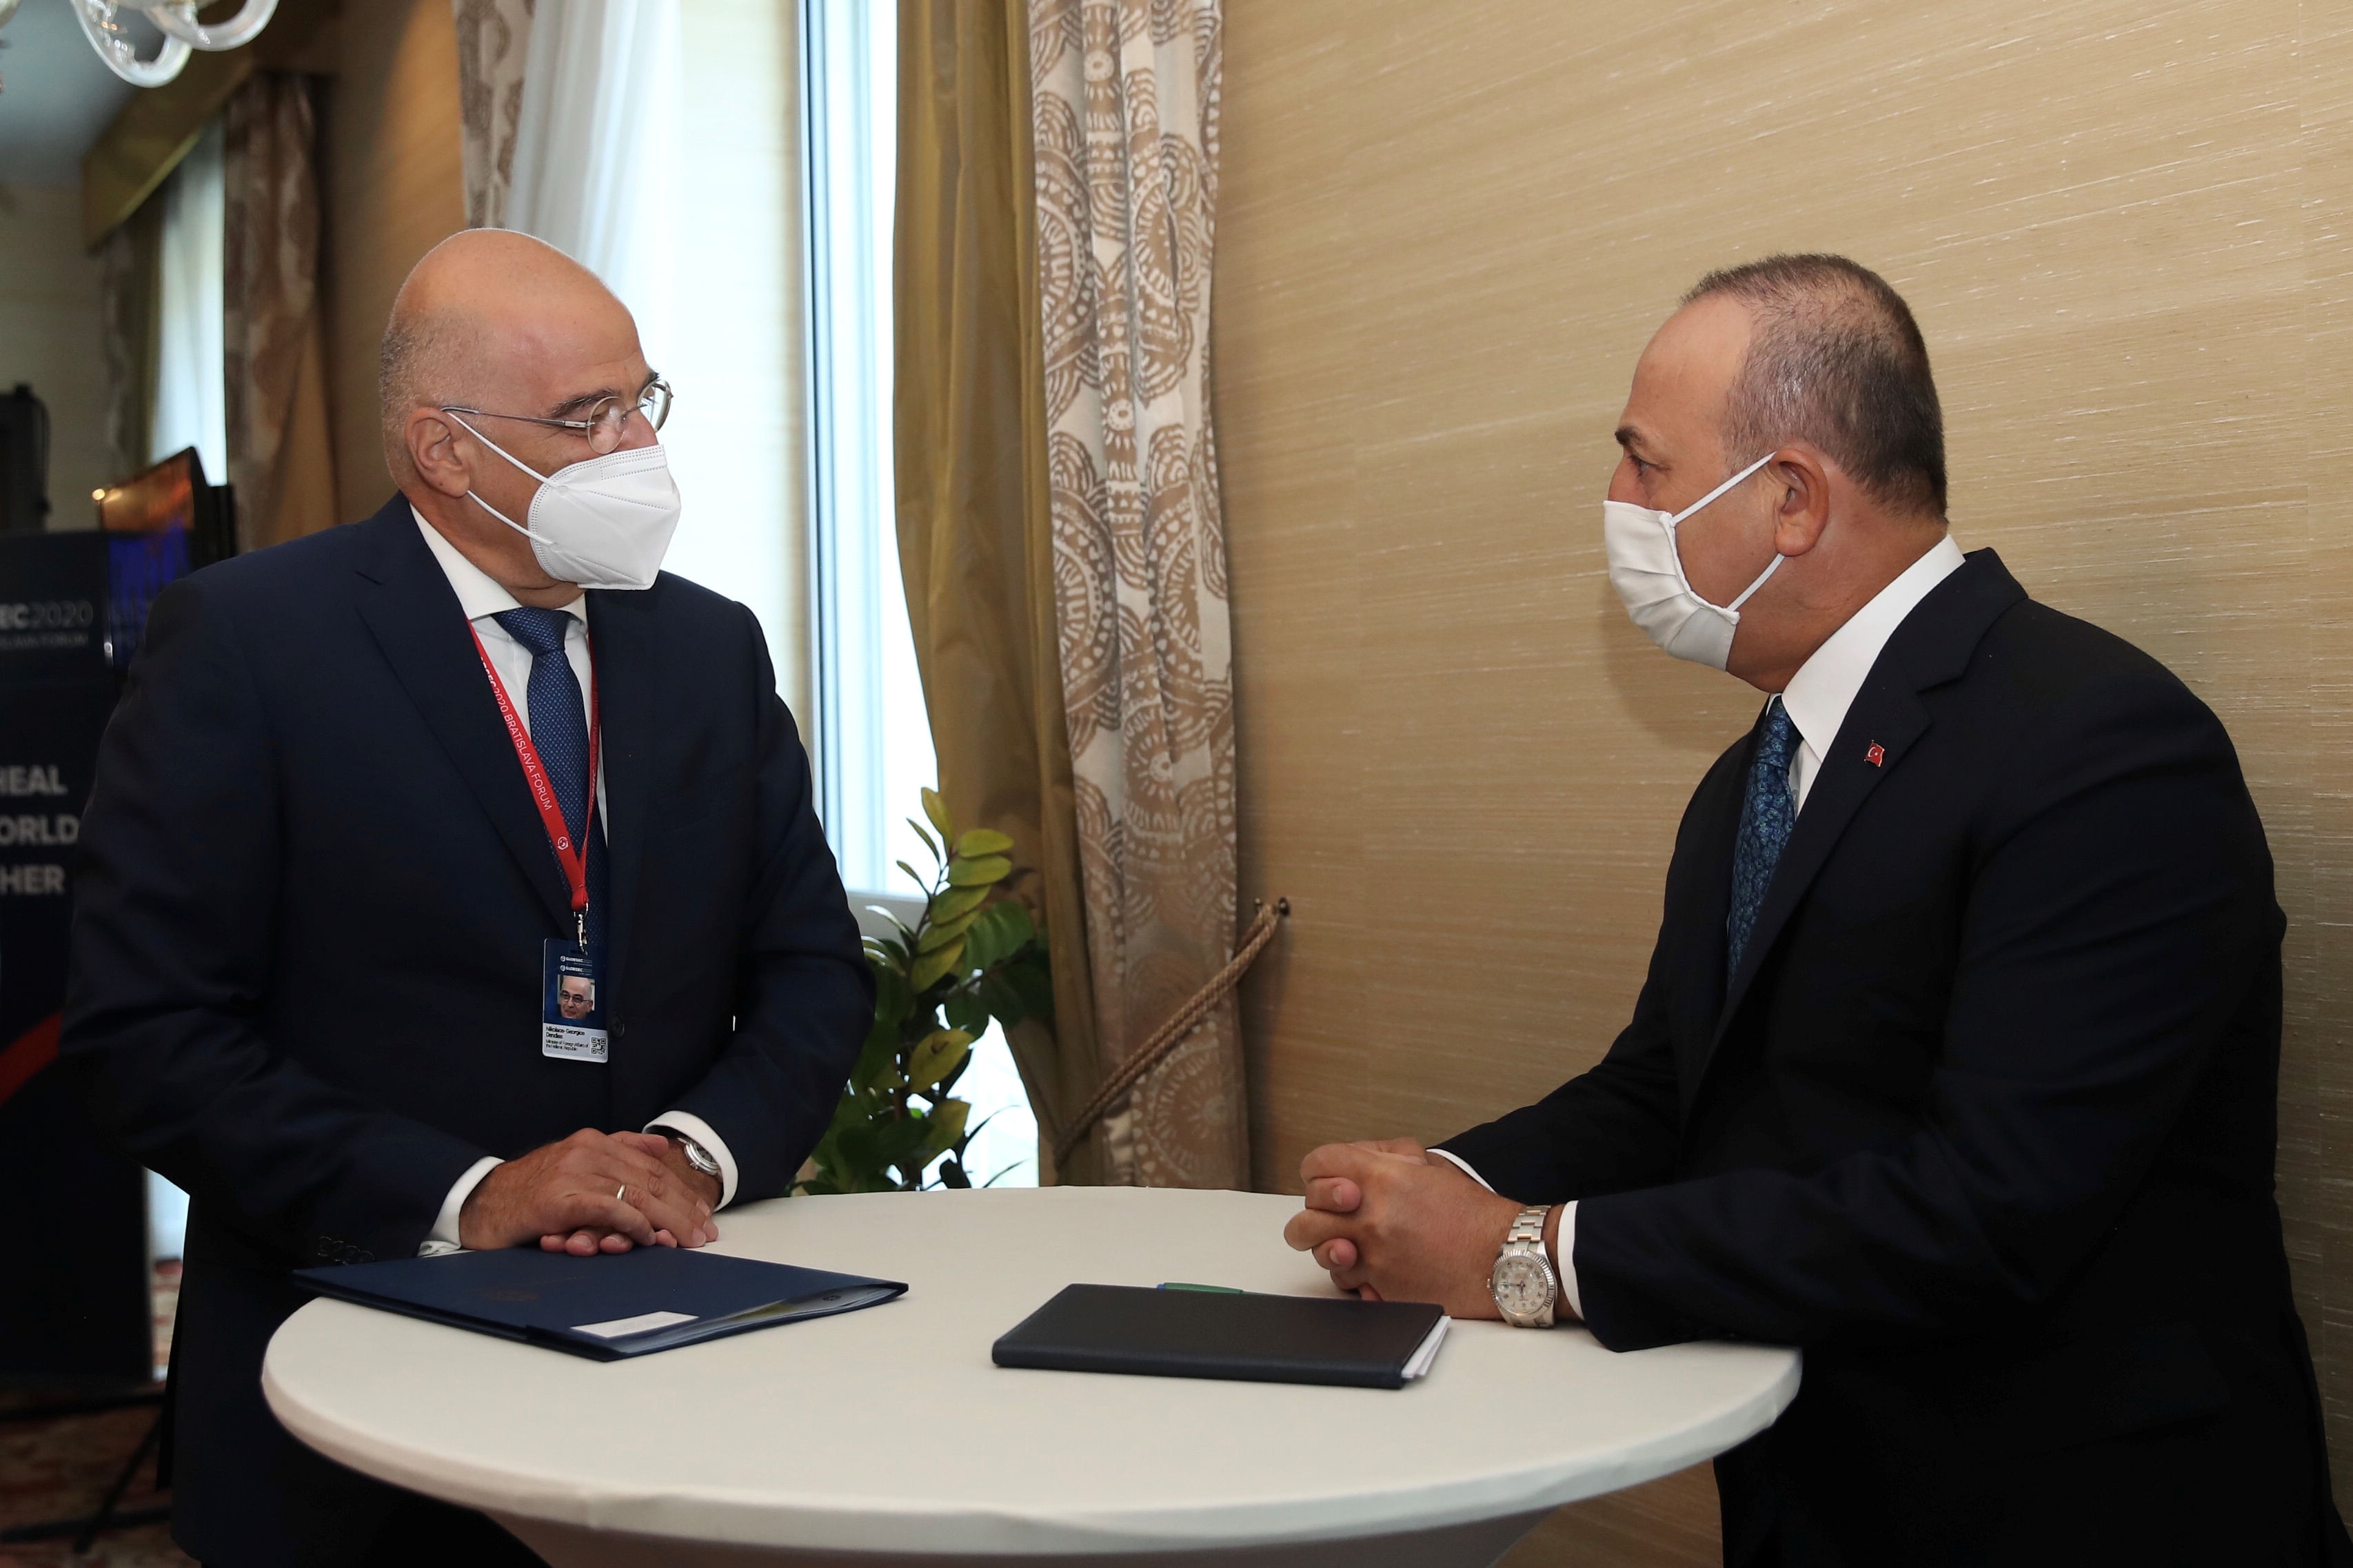 Turkish Foreign Minister Mevlut Cavusoglu meets with his Greek counterpart Nikos Dendias on the sidelines of the Global Security Forum in Bratislava, Slovakia October 8, 2020. Credit: Turkish Foreign Ministry/Handout via REUTERS